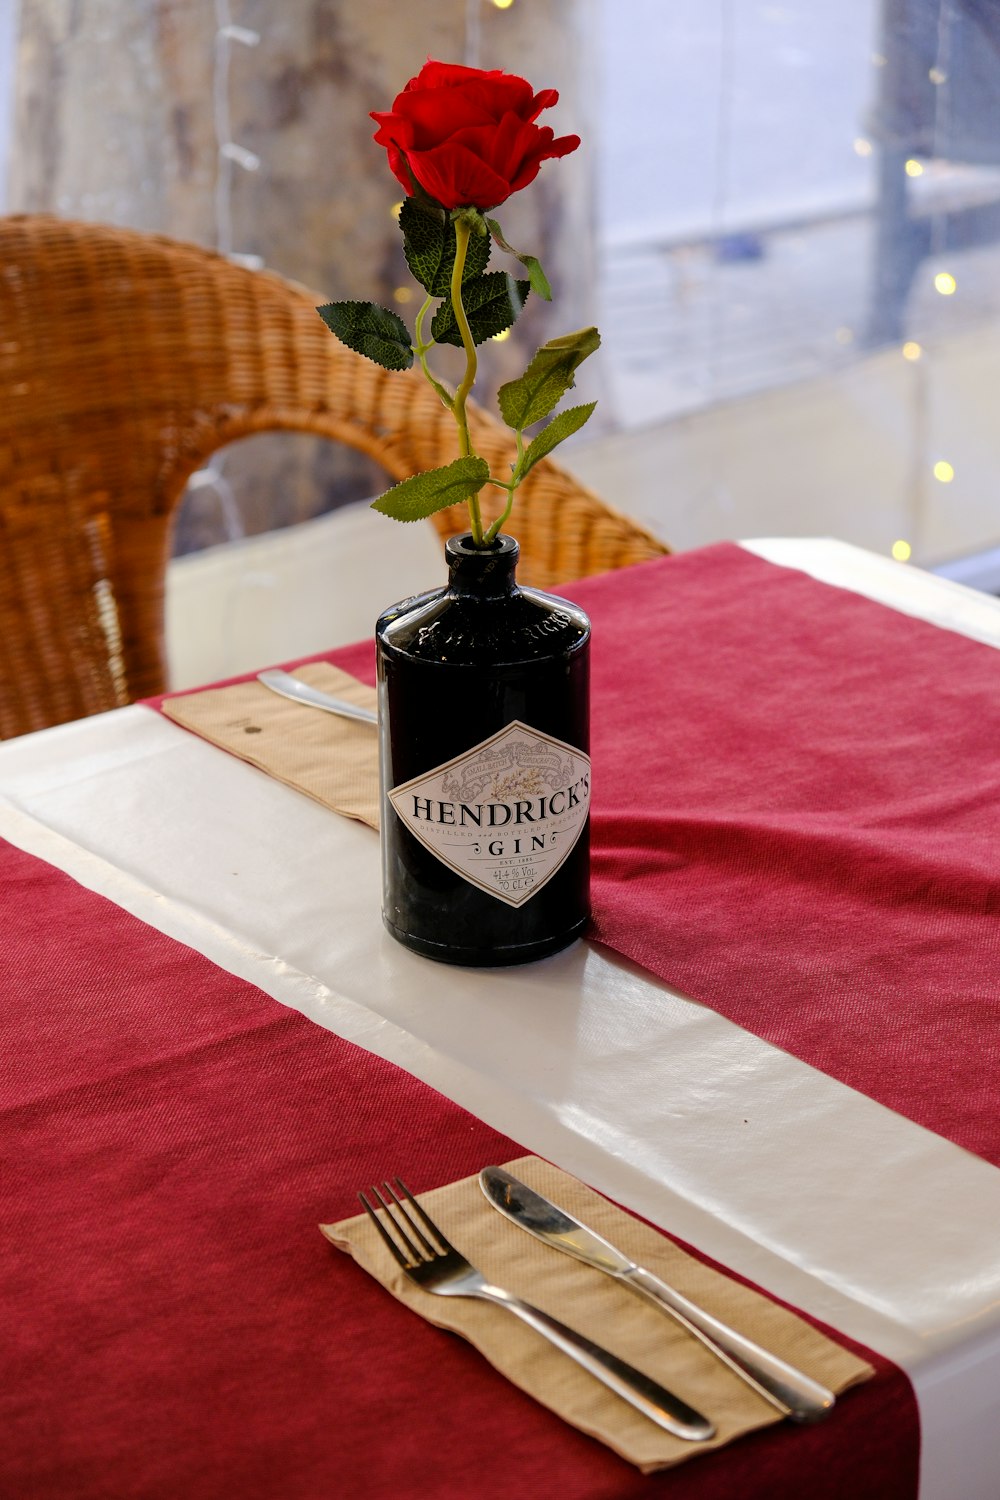 a single red rose in a black vase on a table